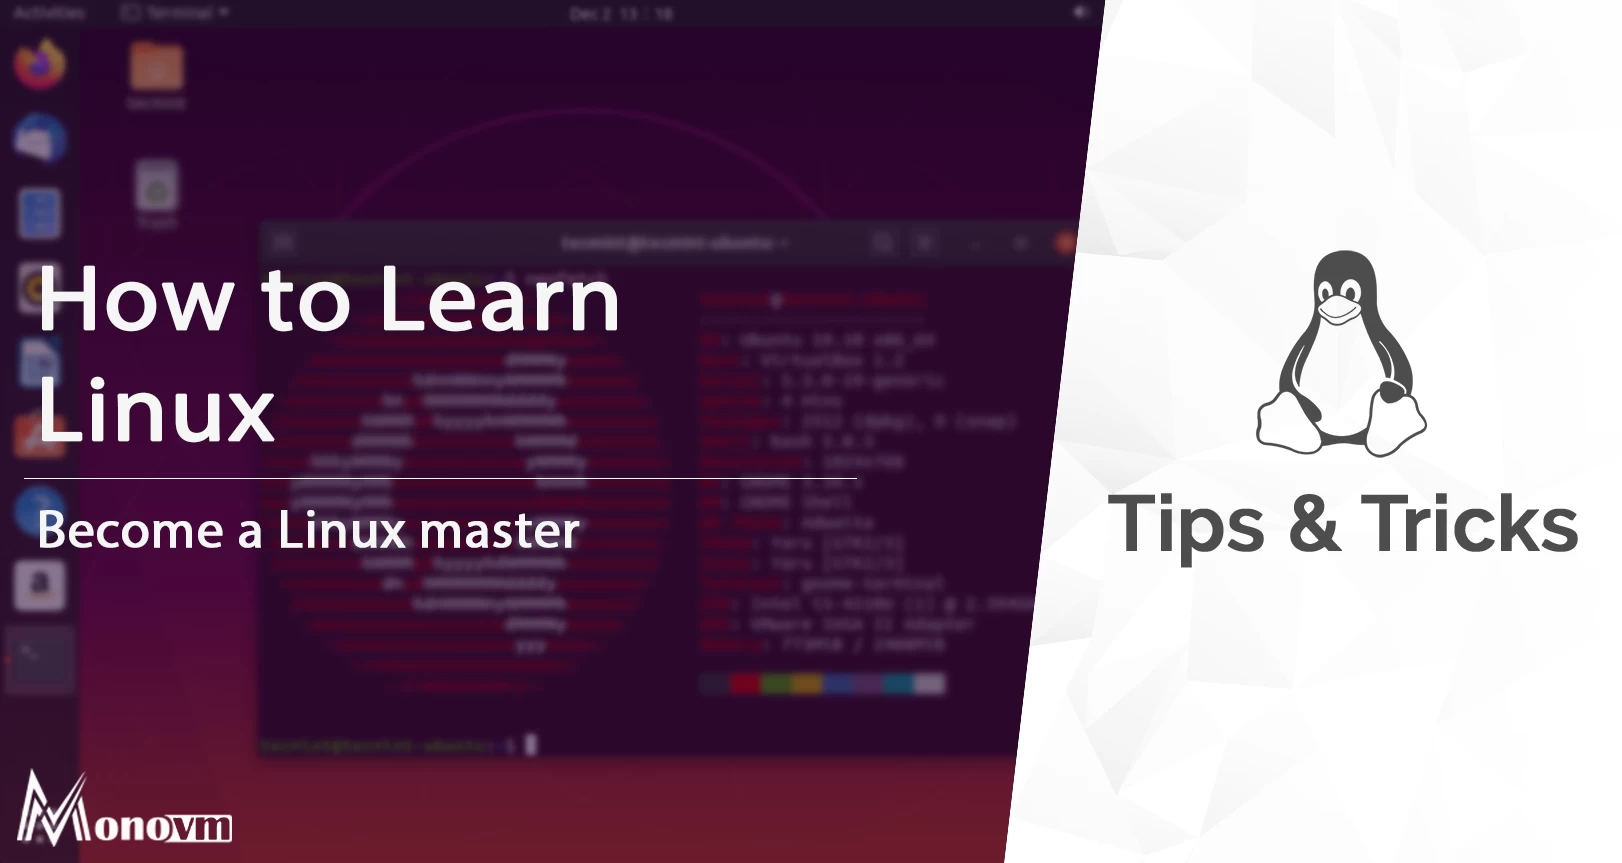 How to Learn Linux